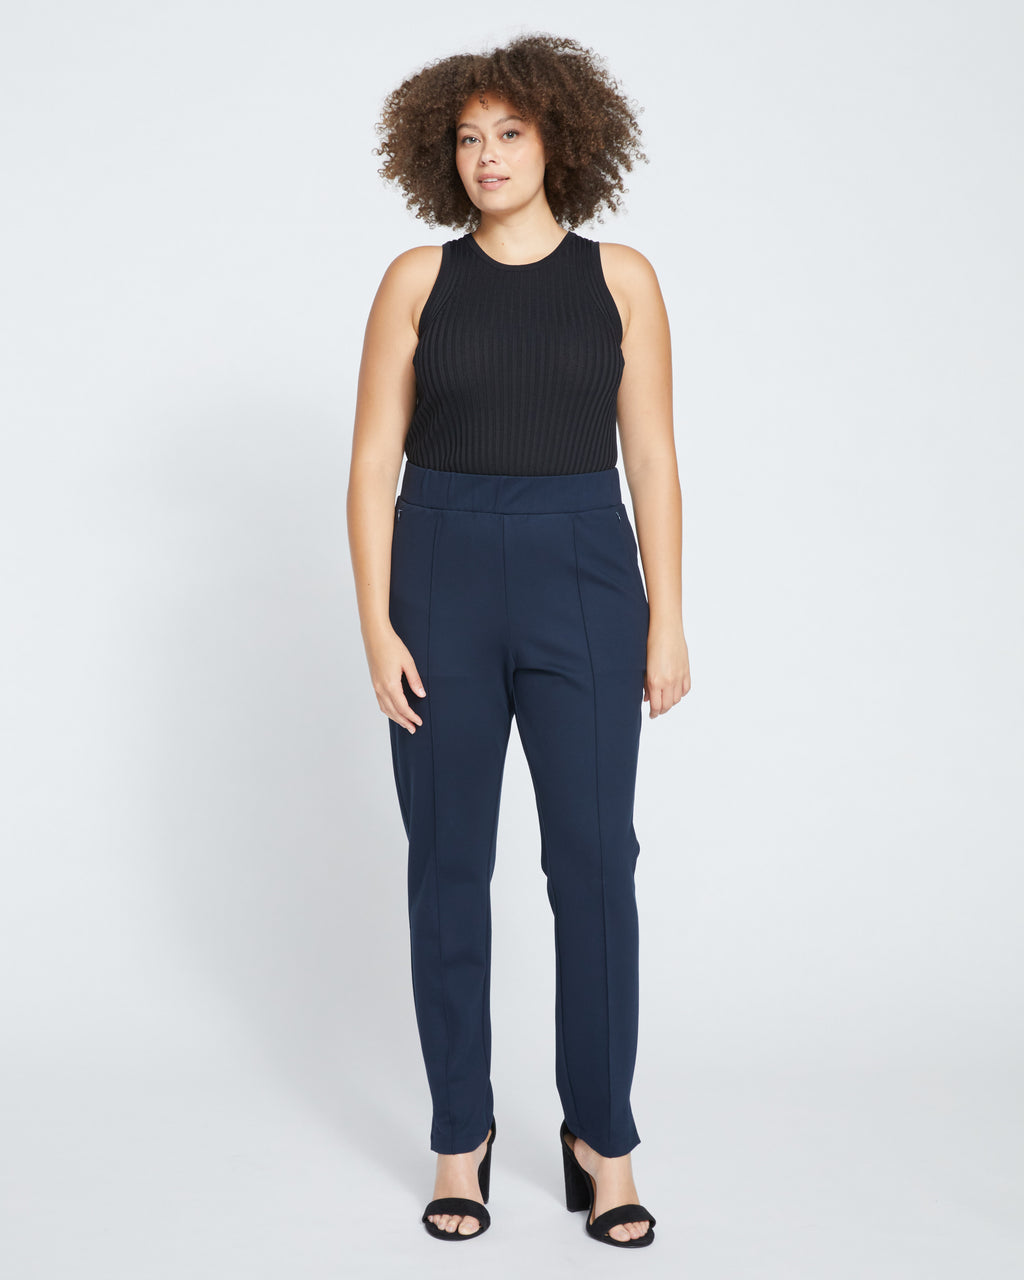 Pull On Bootcut Ponte Pants - Navy